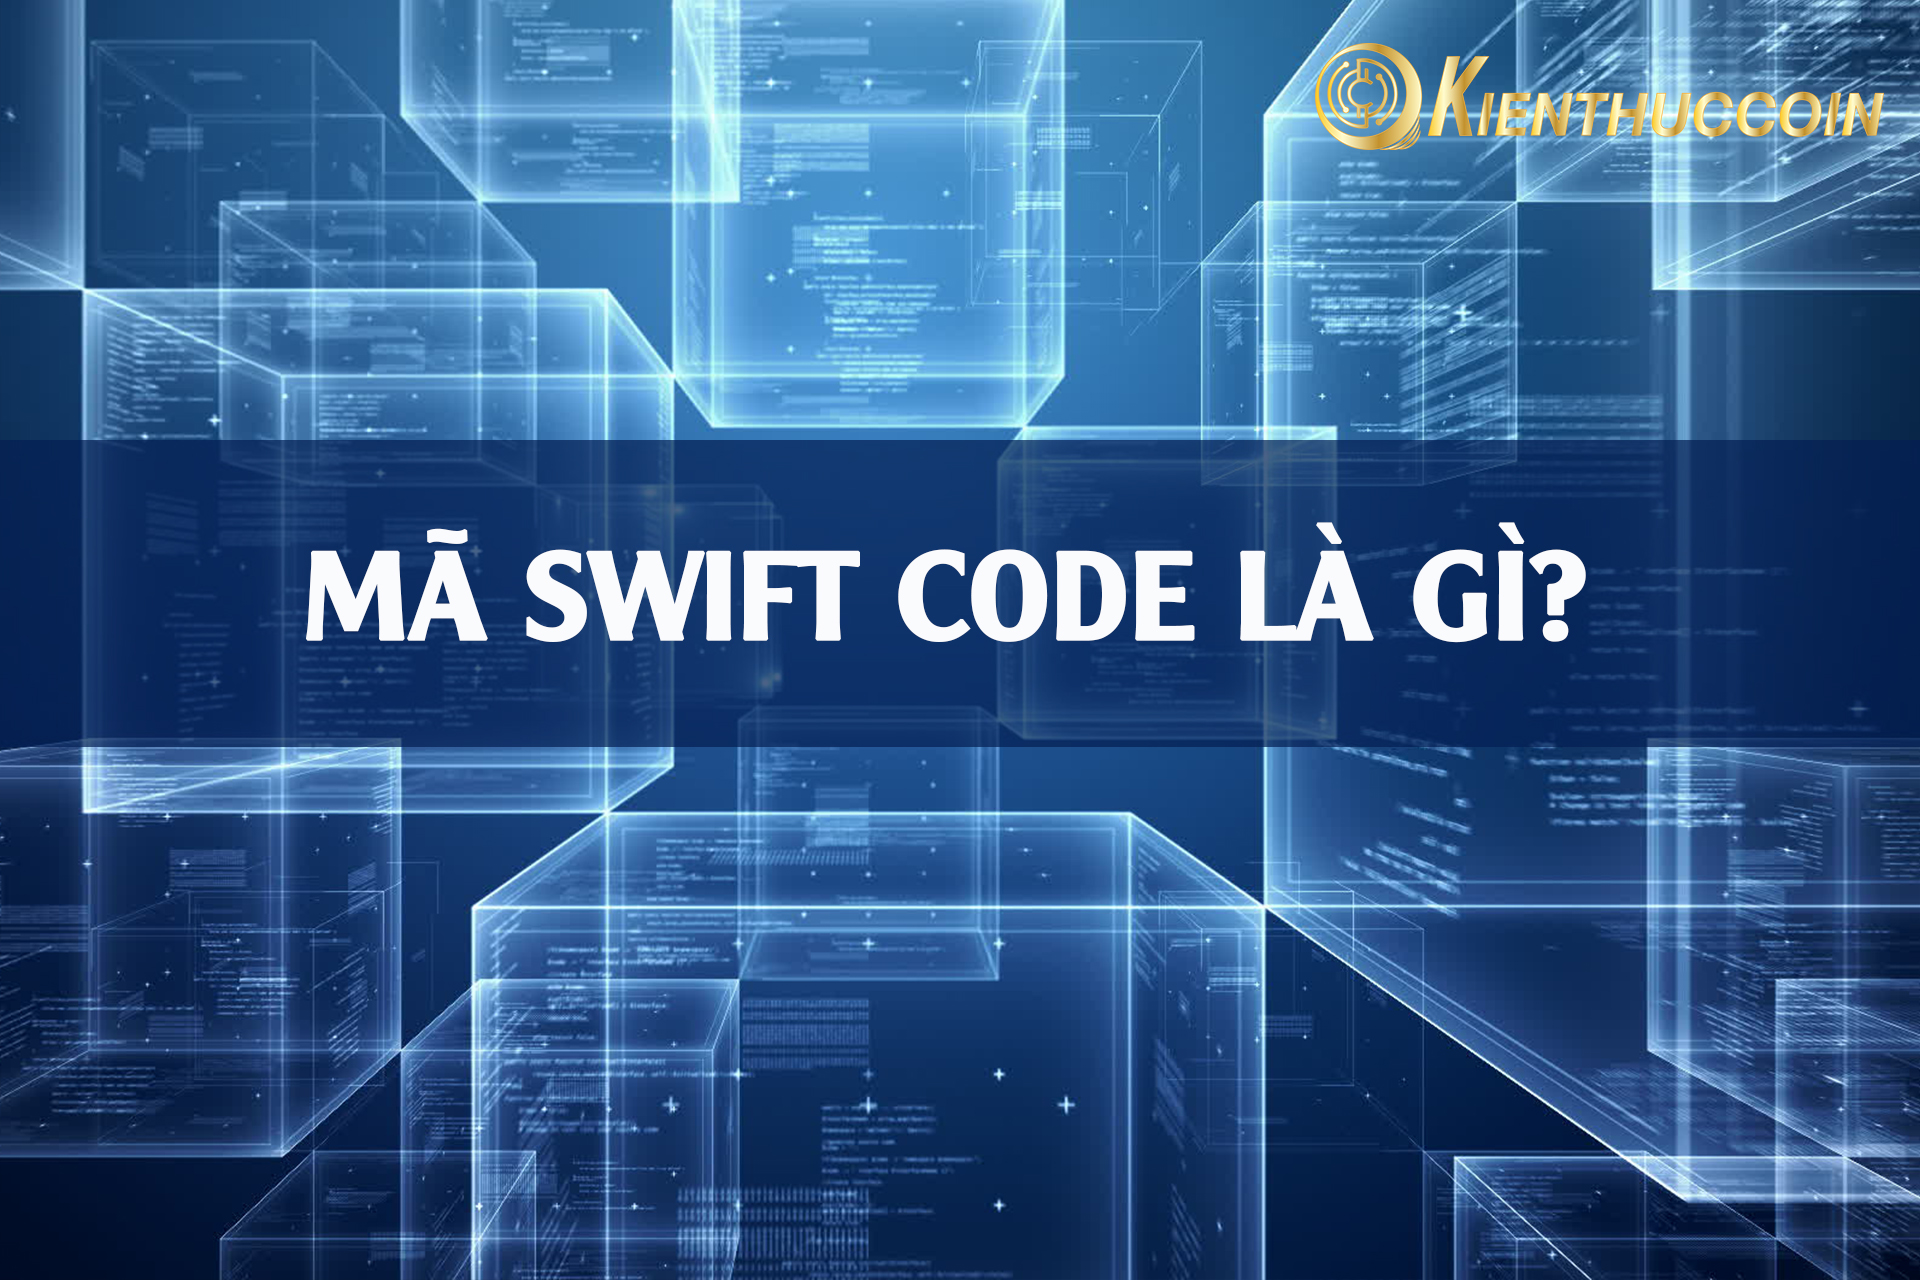 What is Swift Code? What are Swift code of Vietcombank and Vietnamese banks?